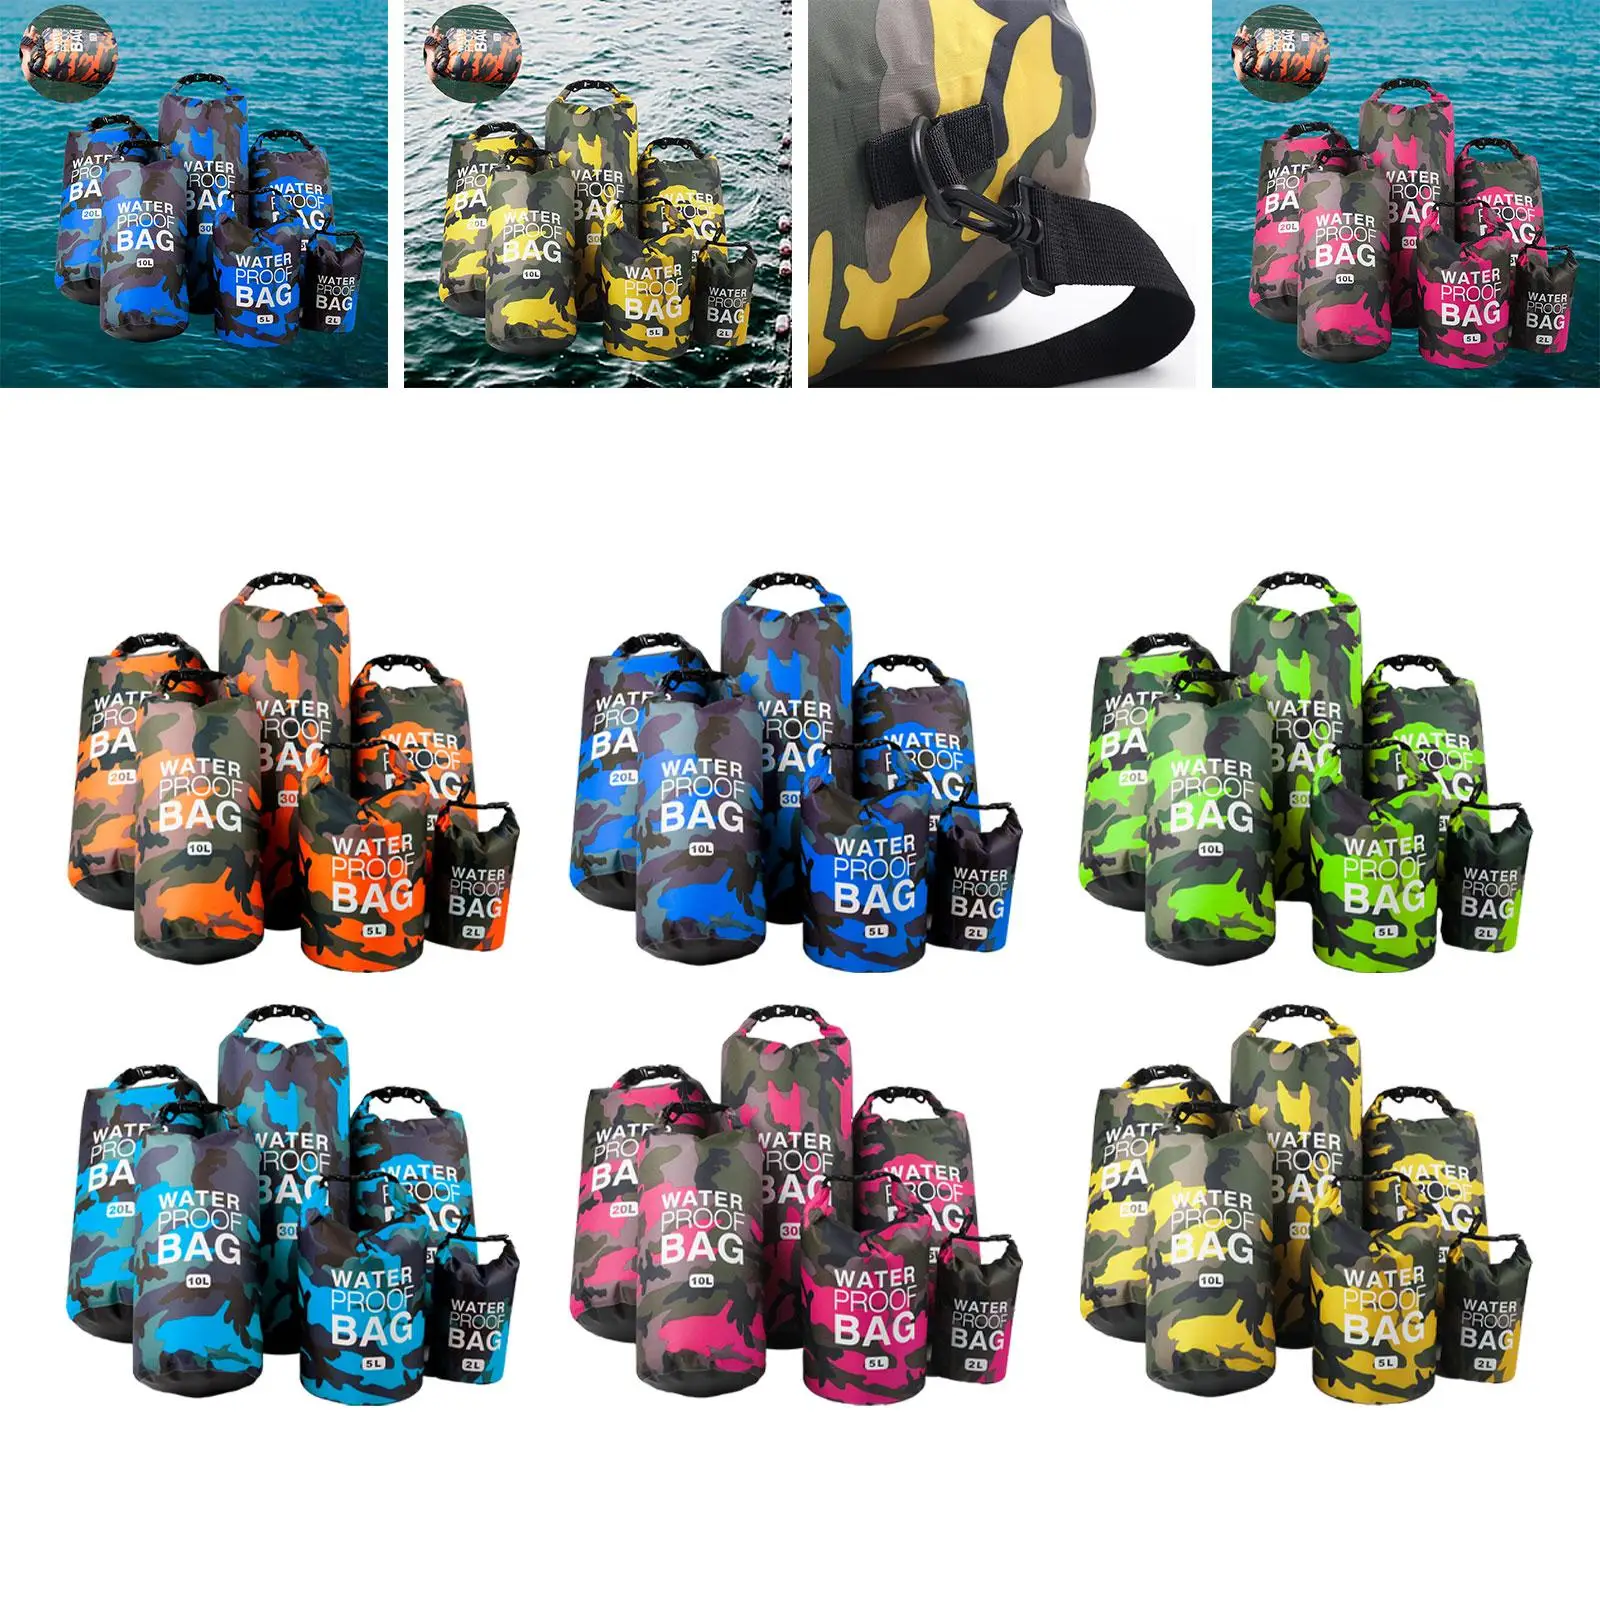 6Pcs Waterproof Dry Bag Keep Gear Dry 2L,5L,10L,15L,20L,30L Dry Storage Bag for Beach Backpacking Surfing Kayaking Camping